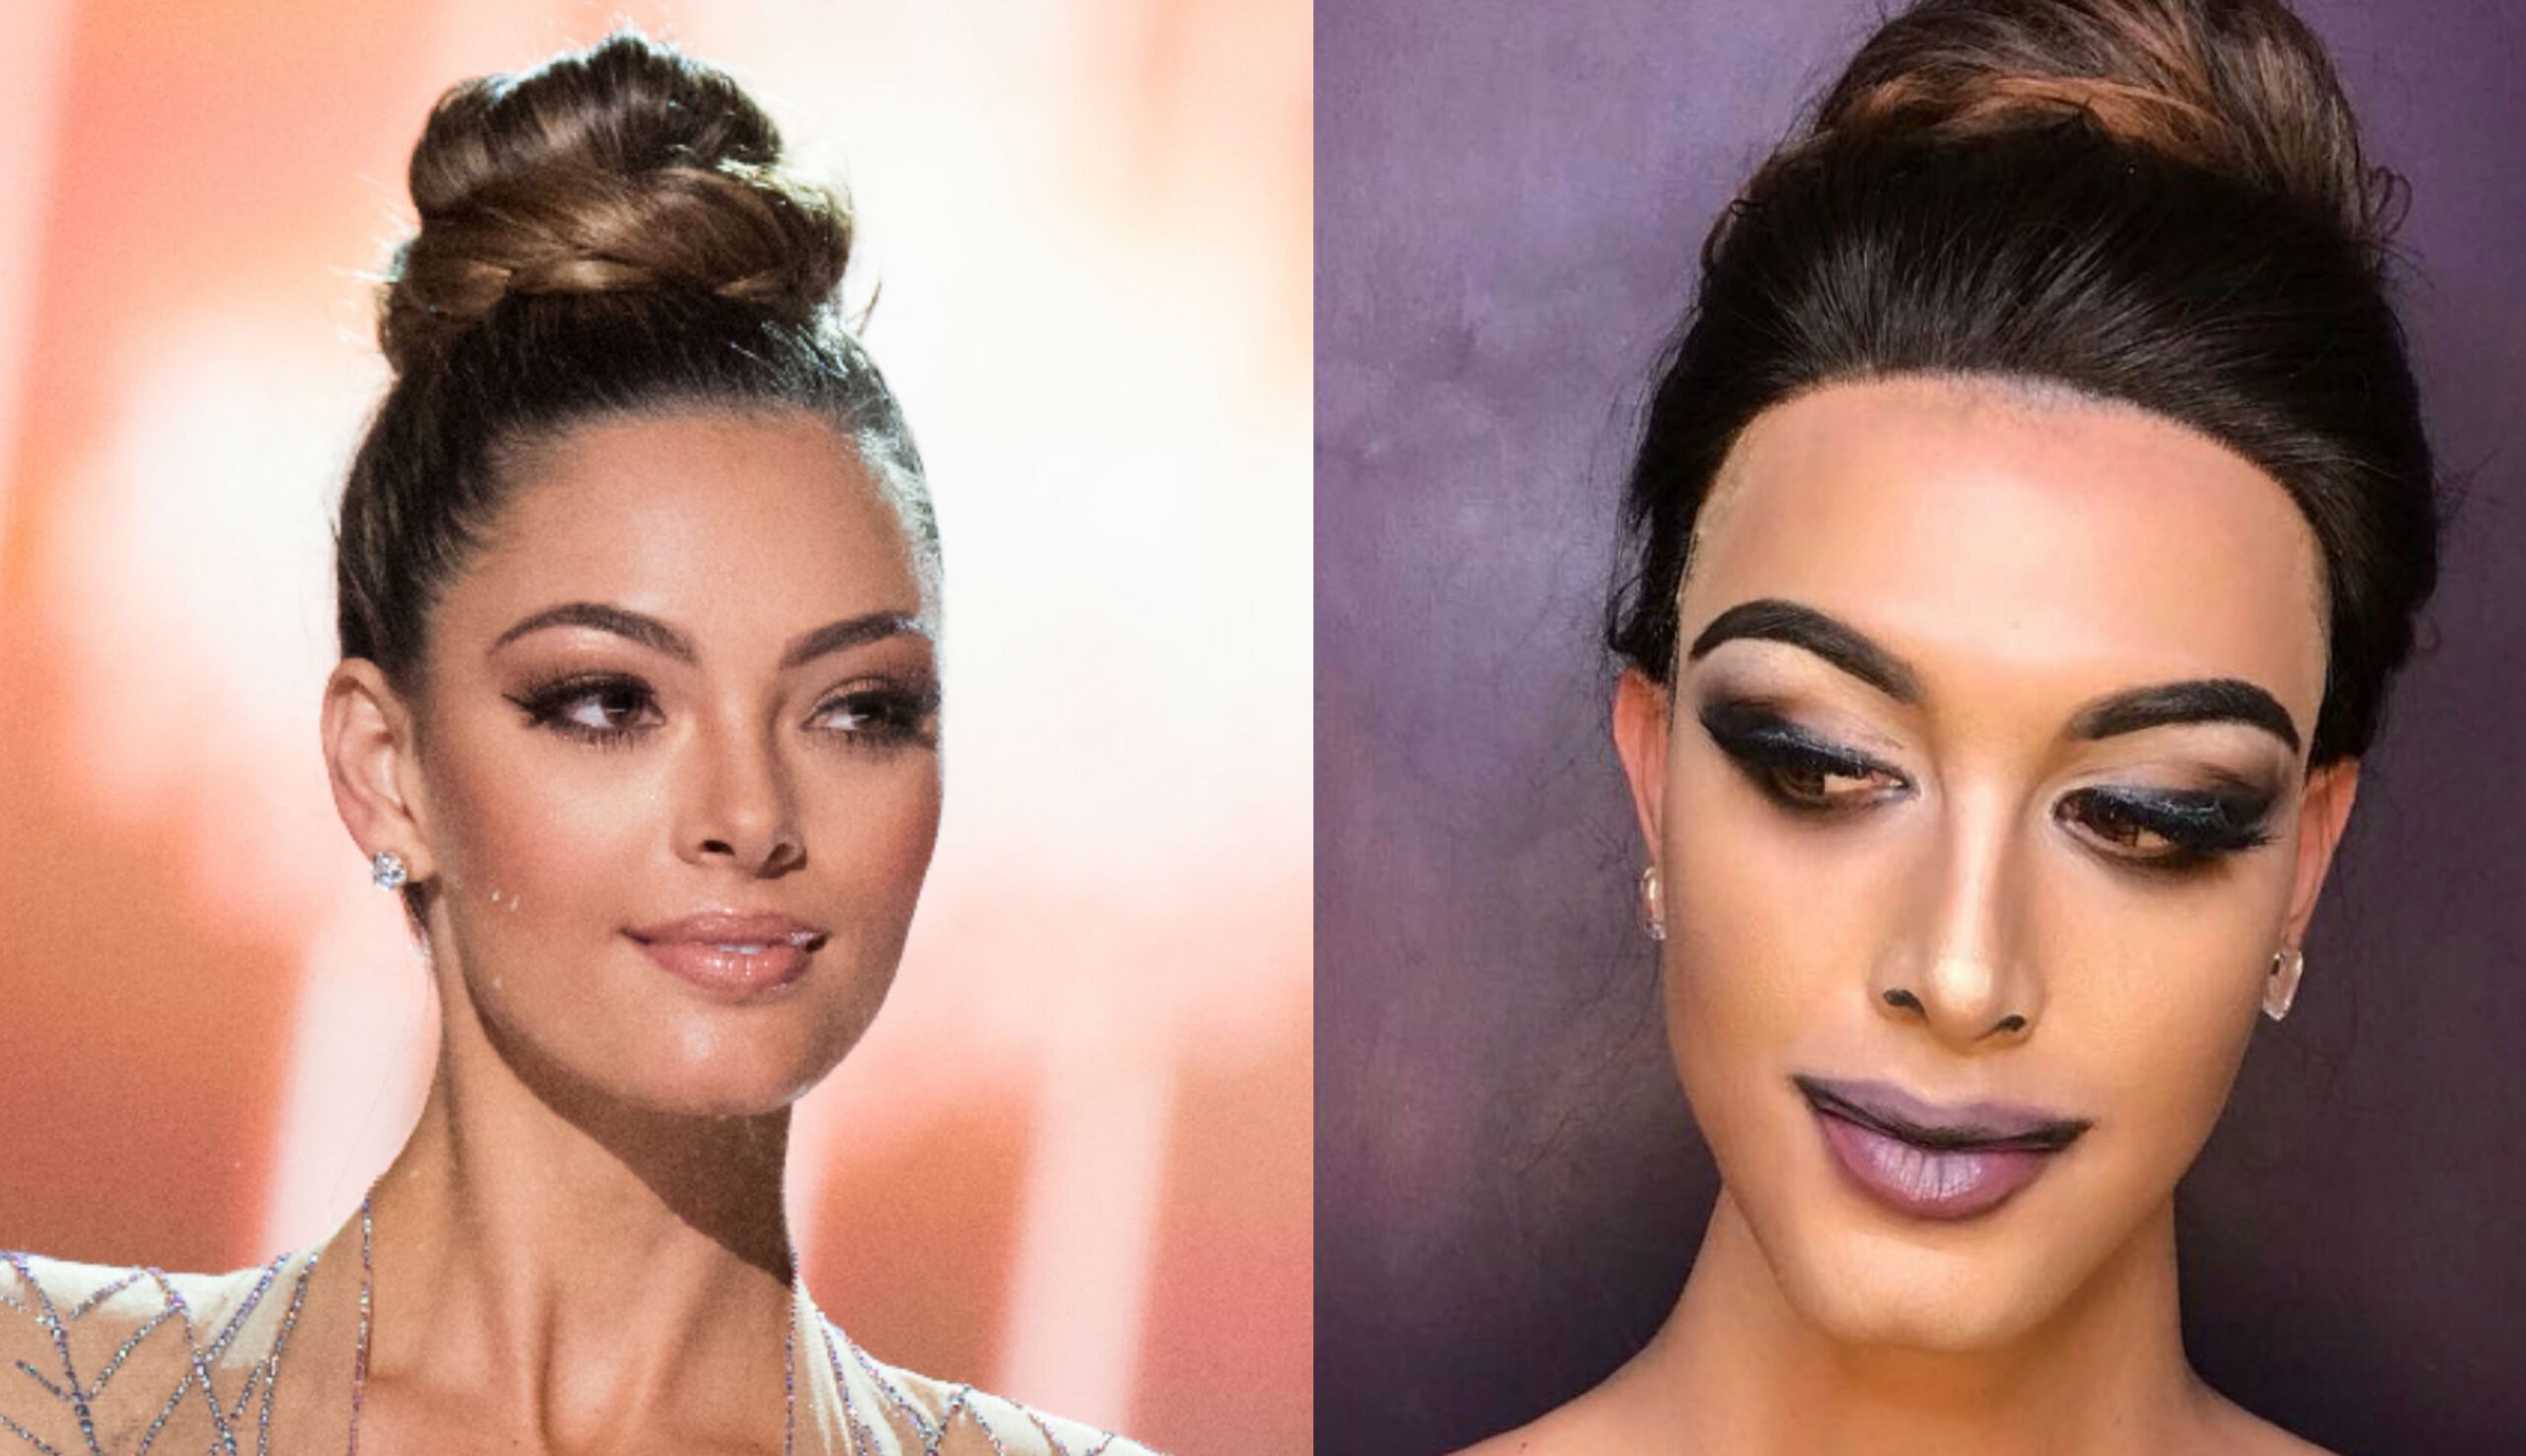 LOOK: Paolo Ballesteros transforms into Miss Universe 2017 Demi-Leigh Nel-Peters